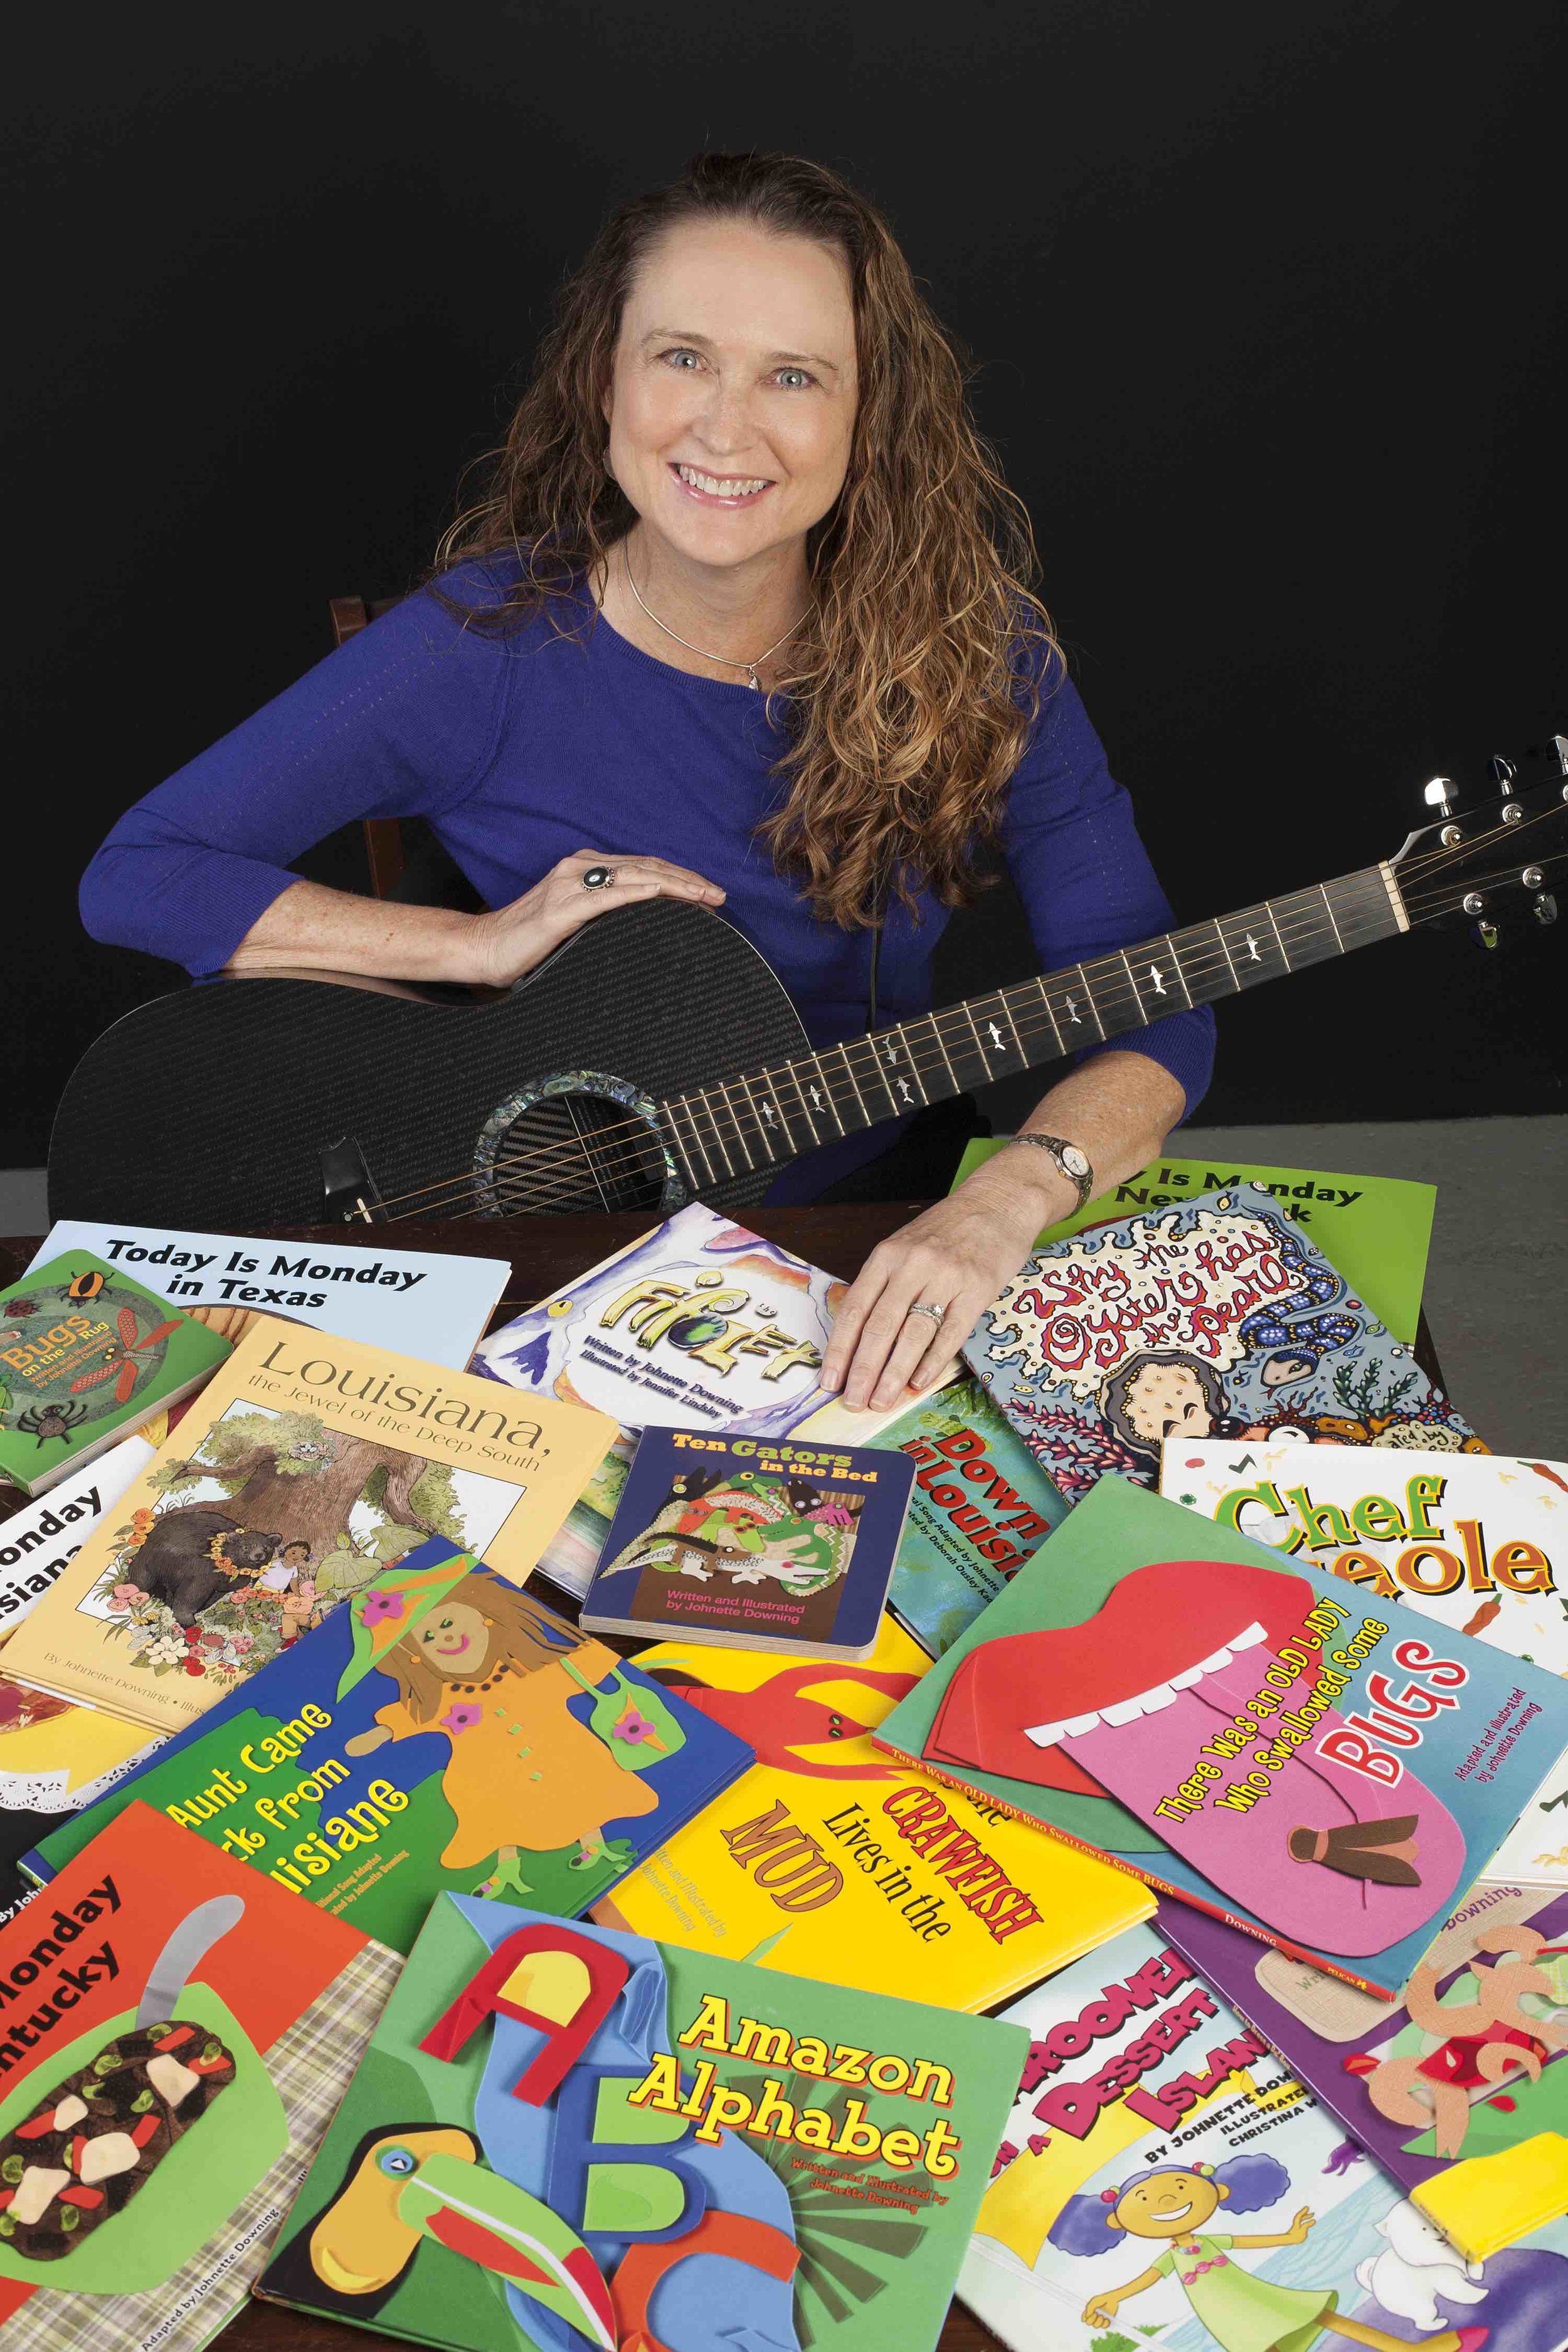 Johnette with books copy.jpg